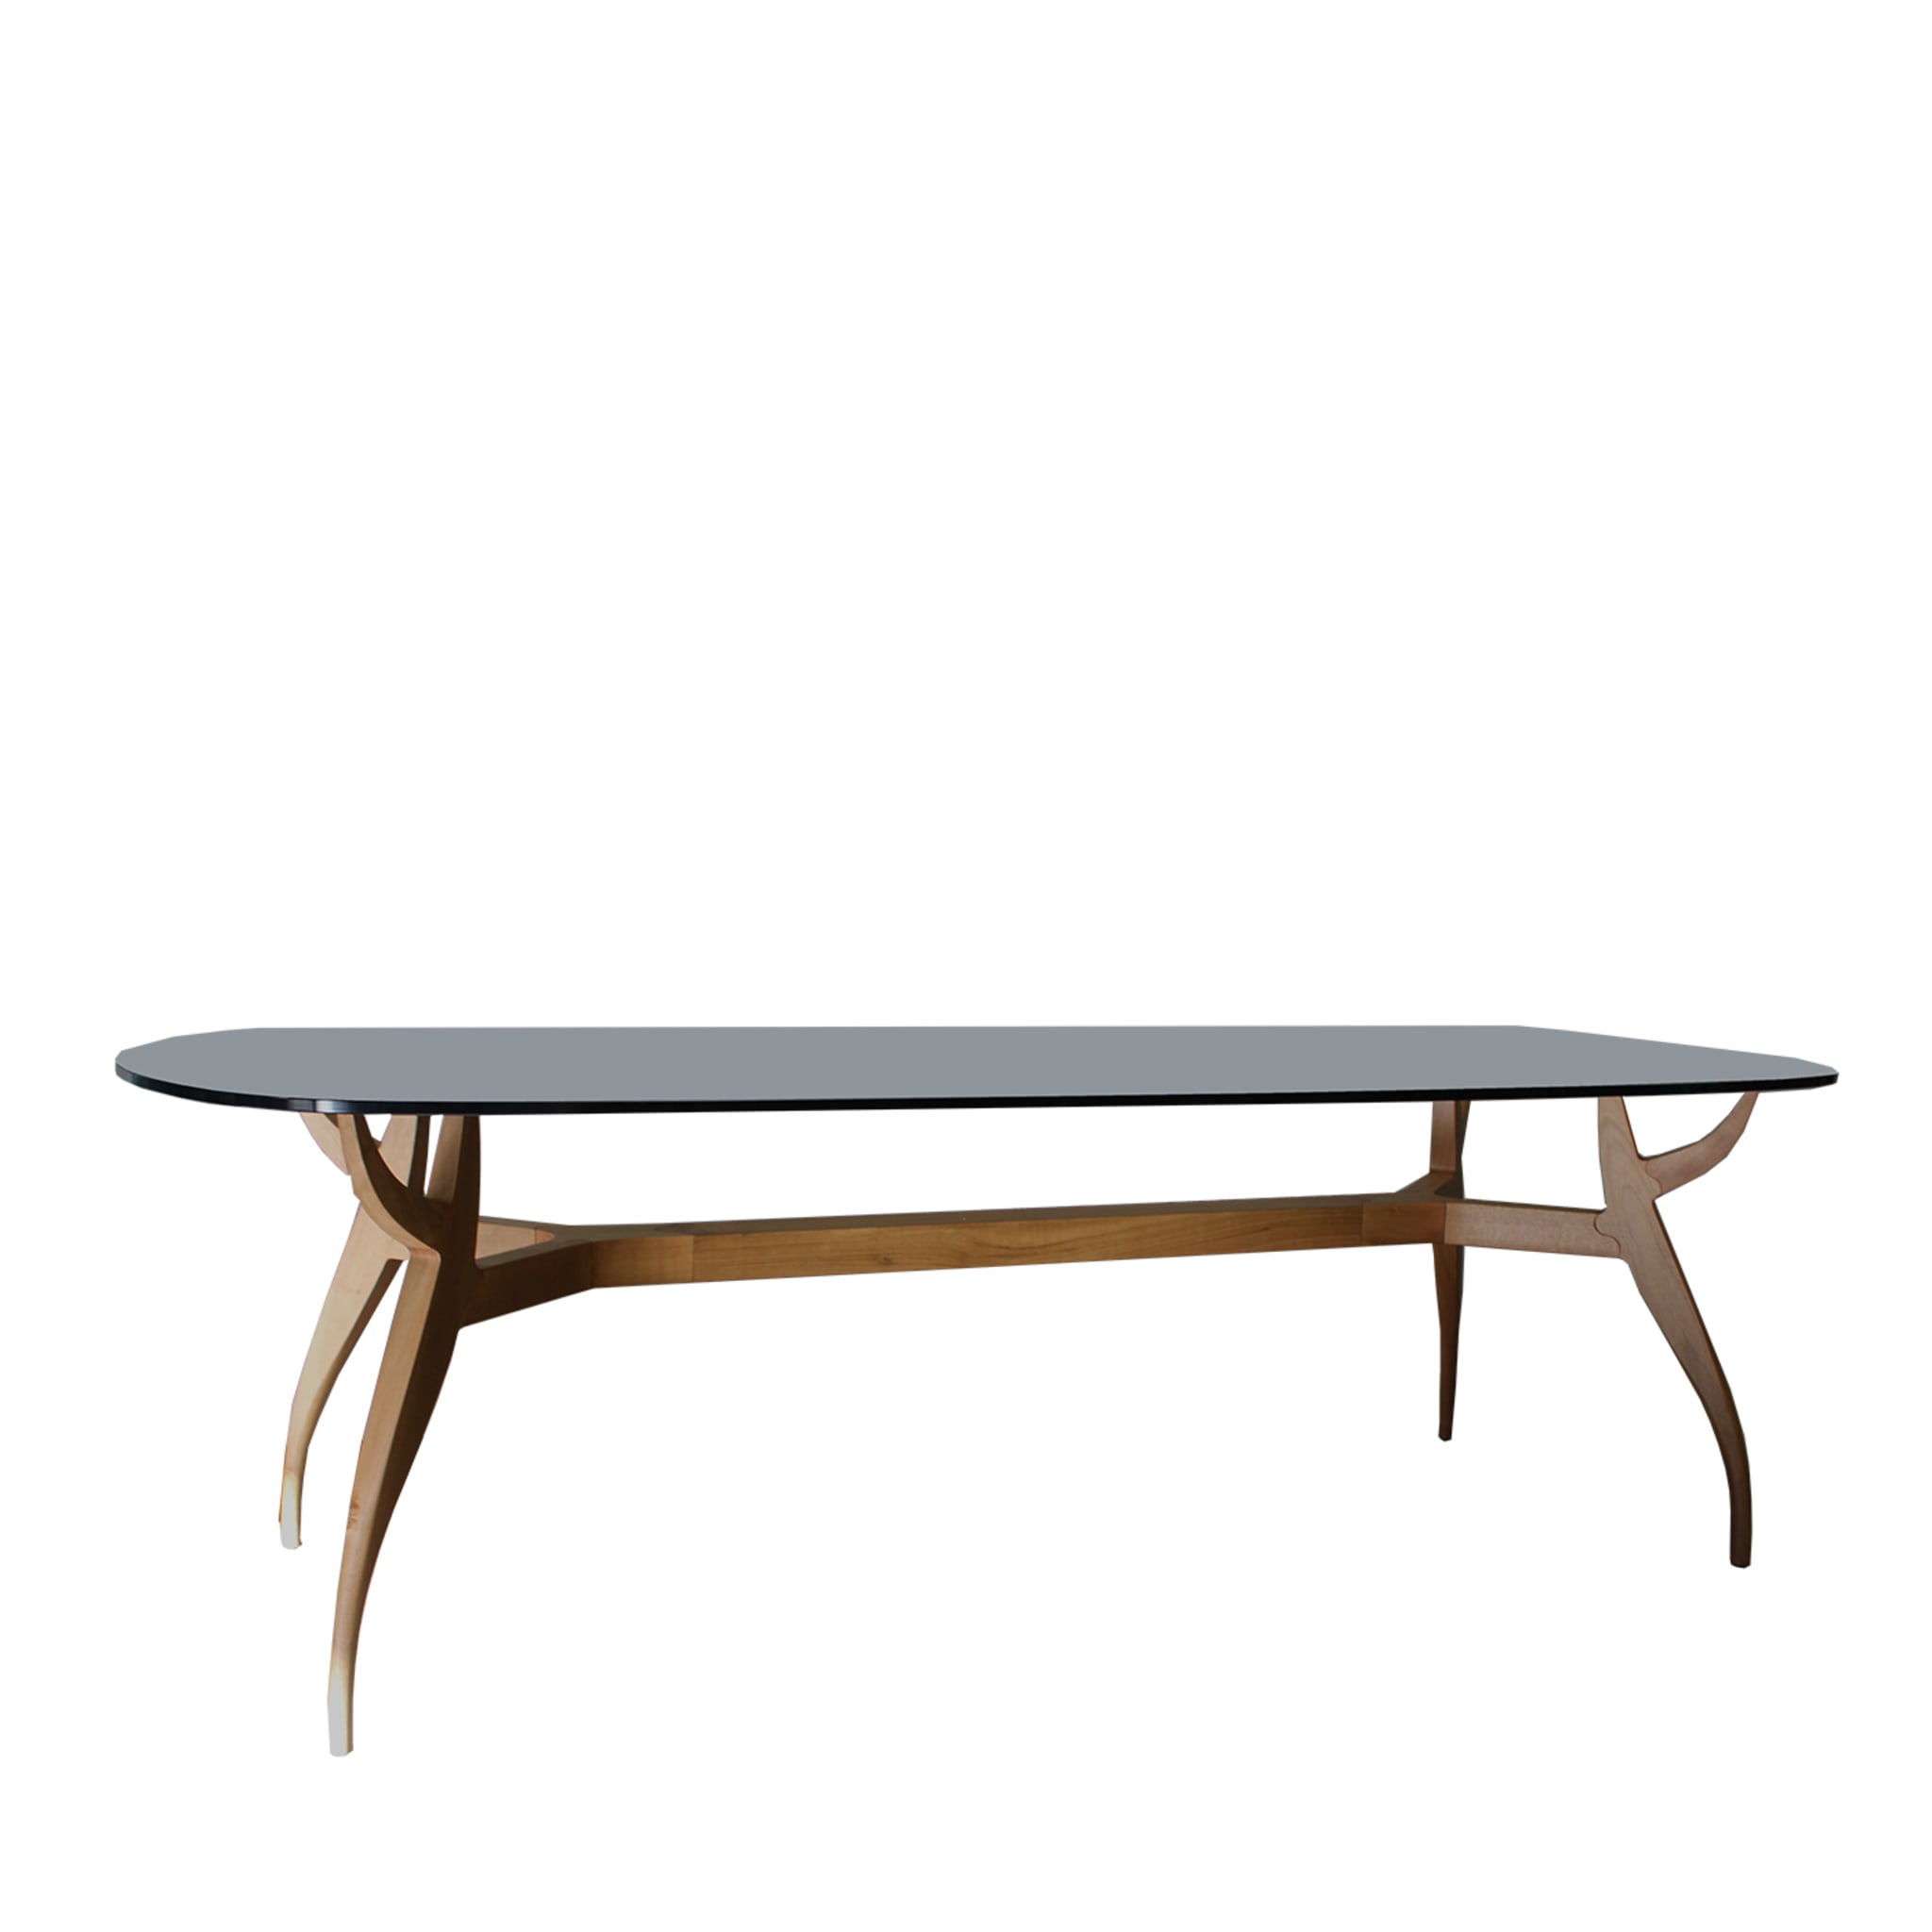 Stag Dining Table By Nigel Coates - Alternative view 3